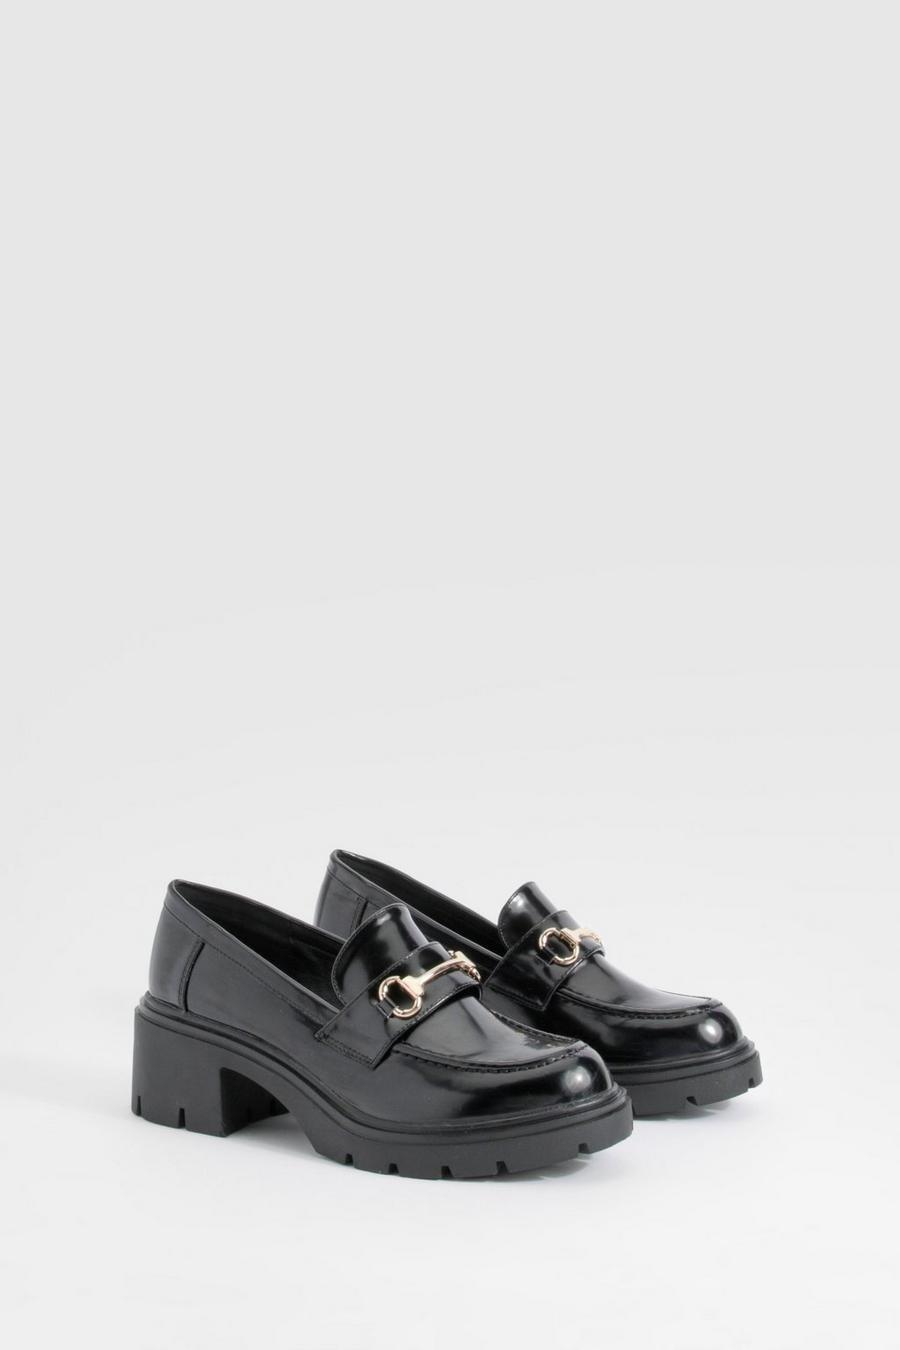 Black T Bar Patent Heeled Chunky Loafers   